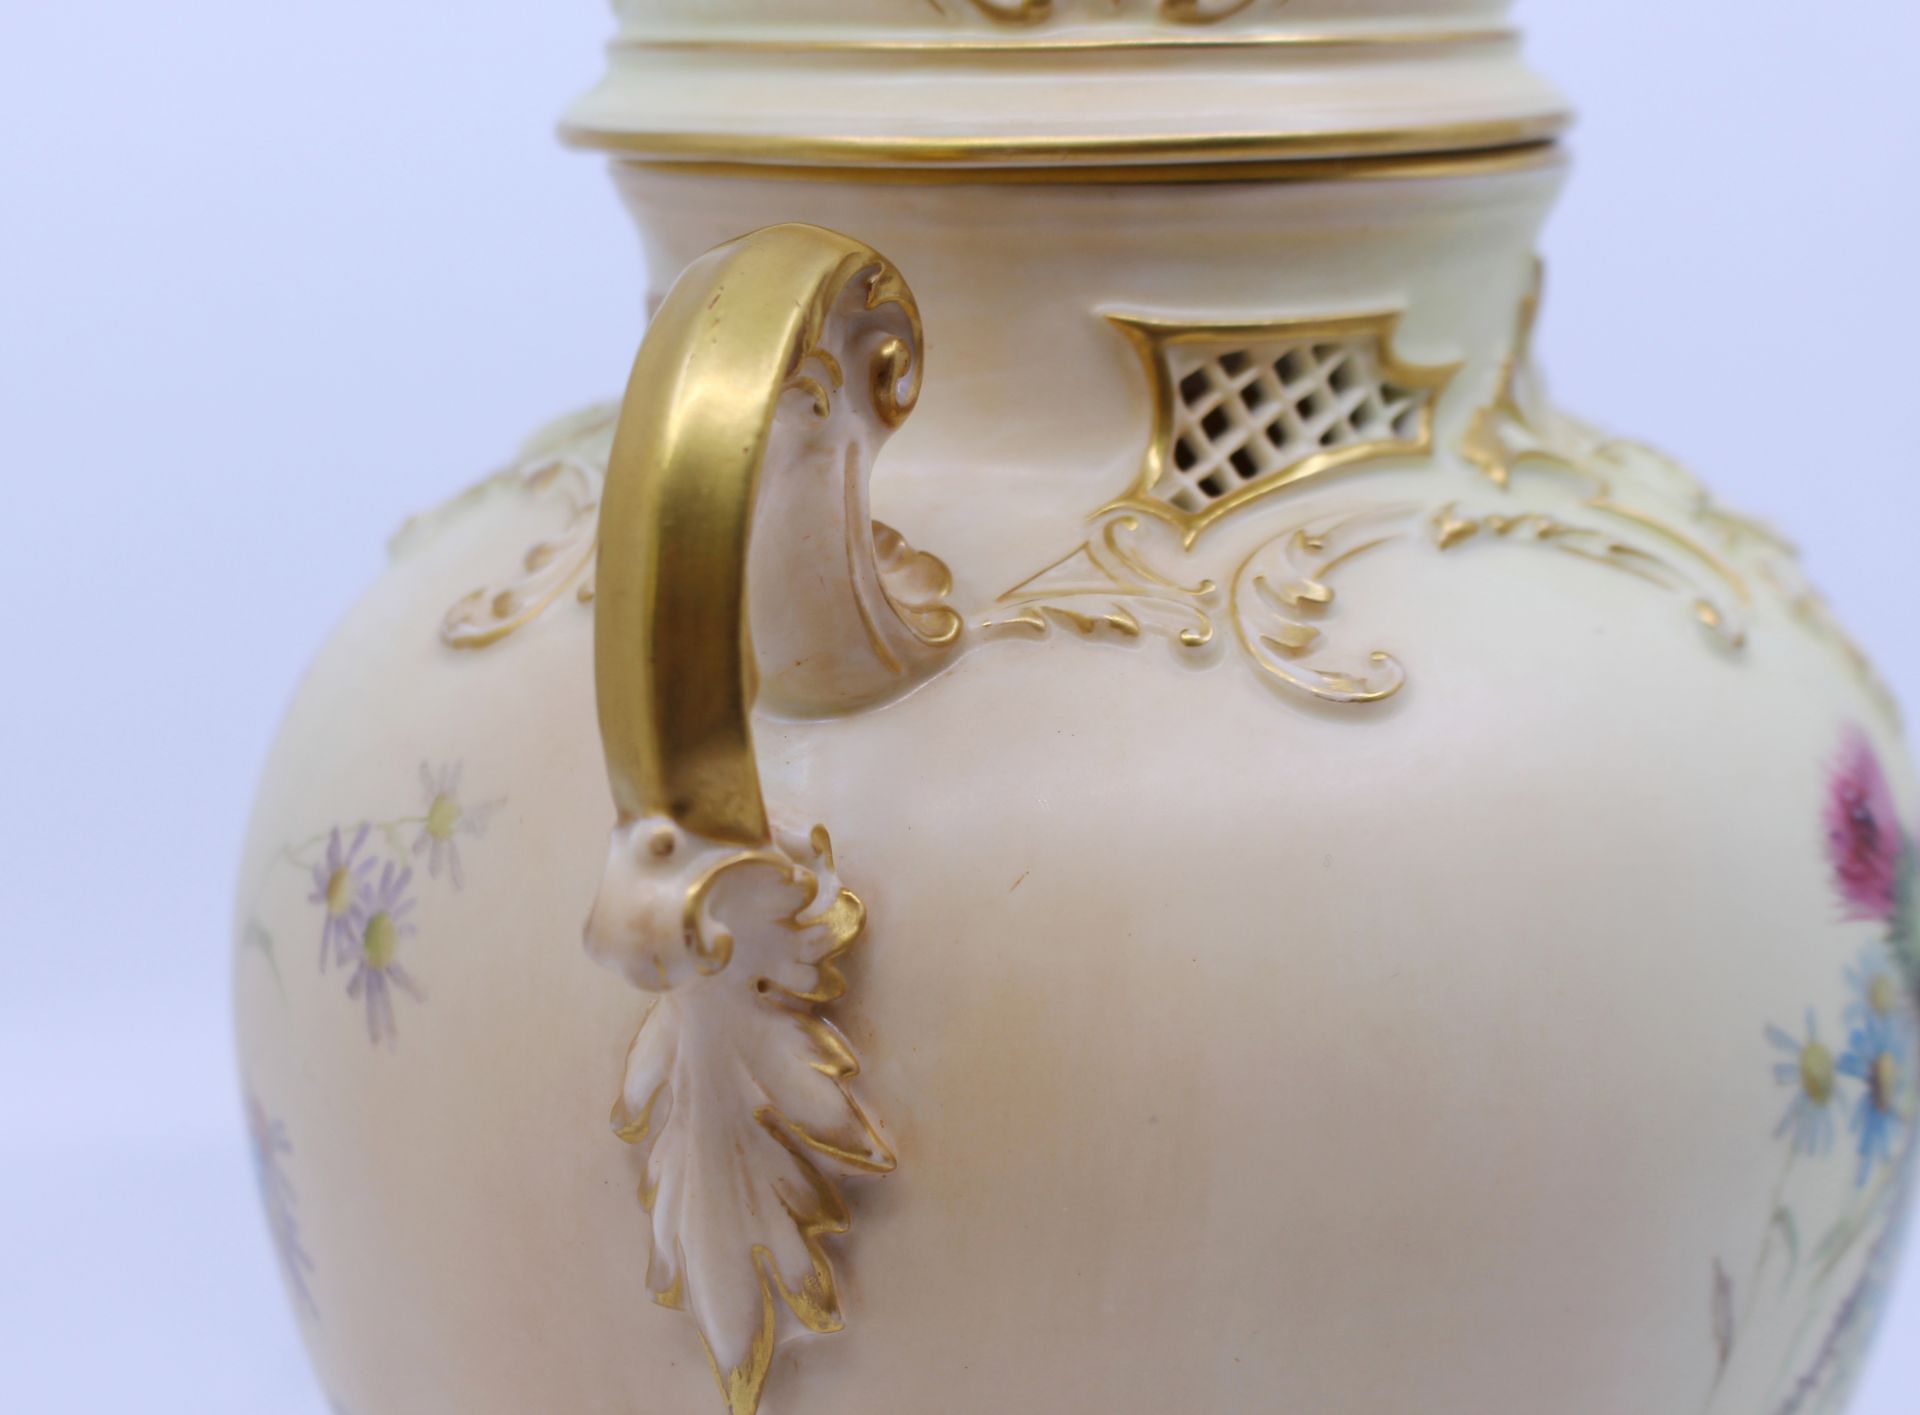 Royal Worcester Edward Raby Two Handled Vase & Cover 1896 - Image 14 of 15